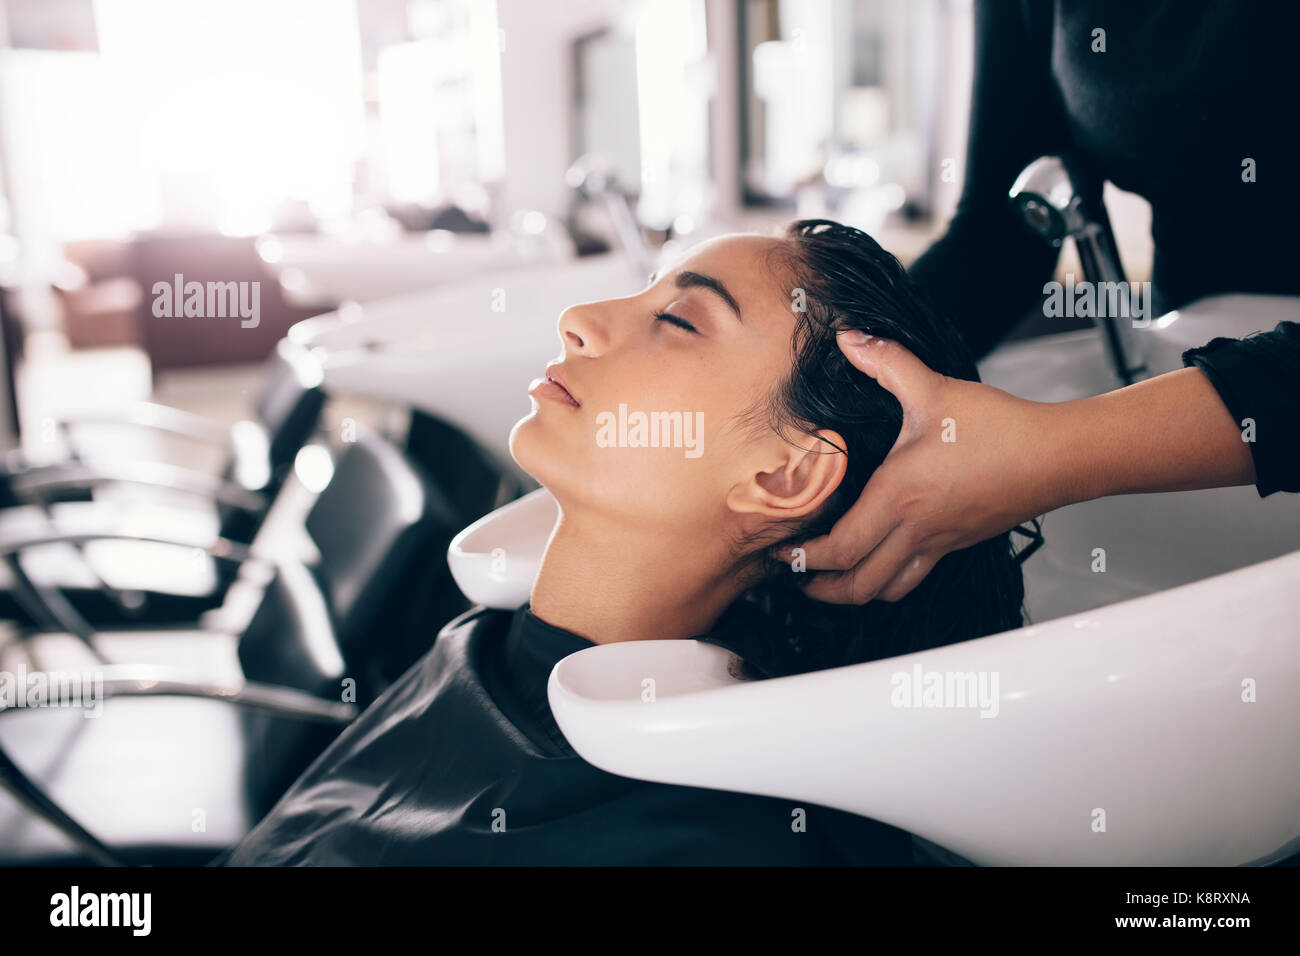 Female hairdresser rinsing hair of a customer . Woman getting hair spa treatment done at salon. Stock Photo